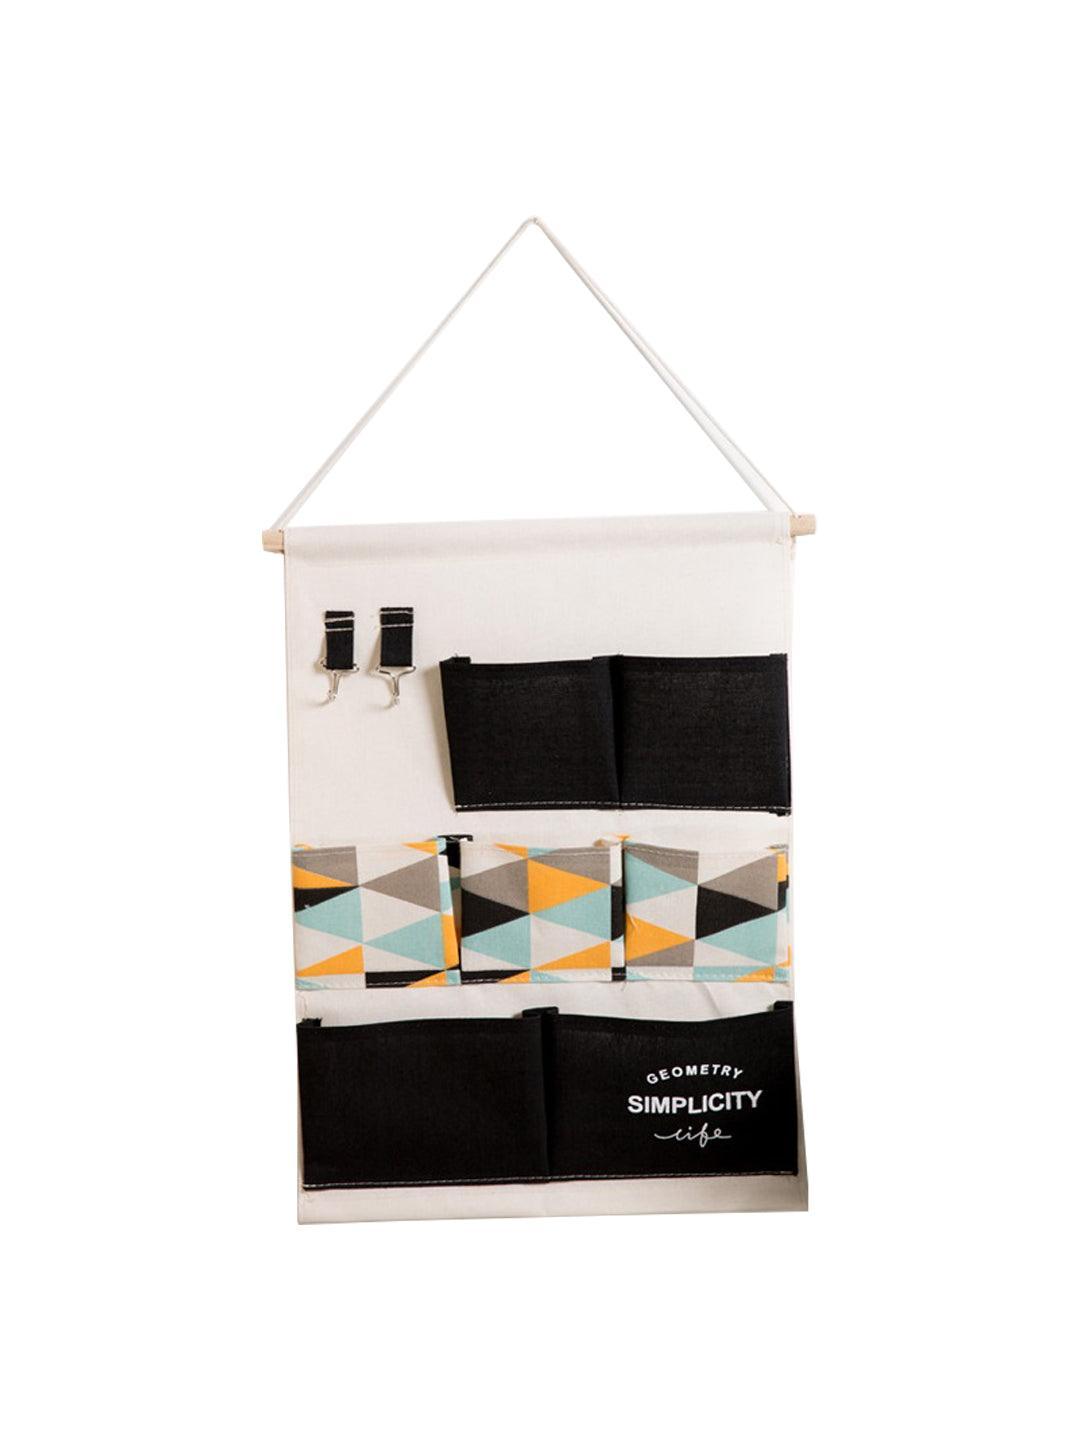 Market 99 Wall Hanging Storage Bag With 7 Pockets And Key Hook - MARKET 99